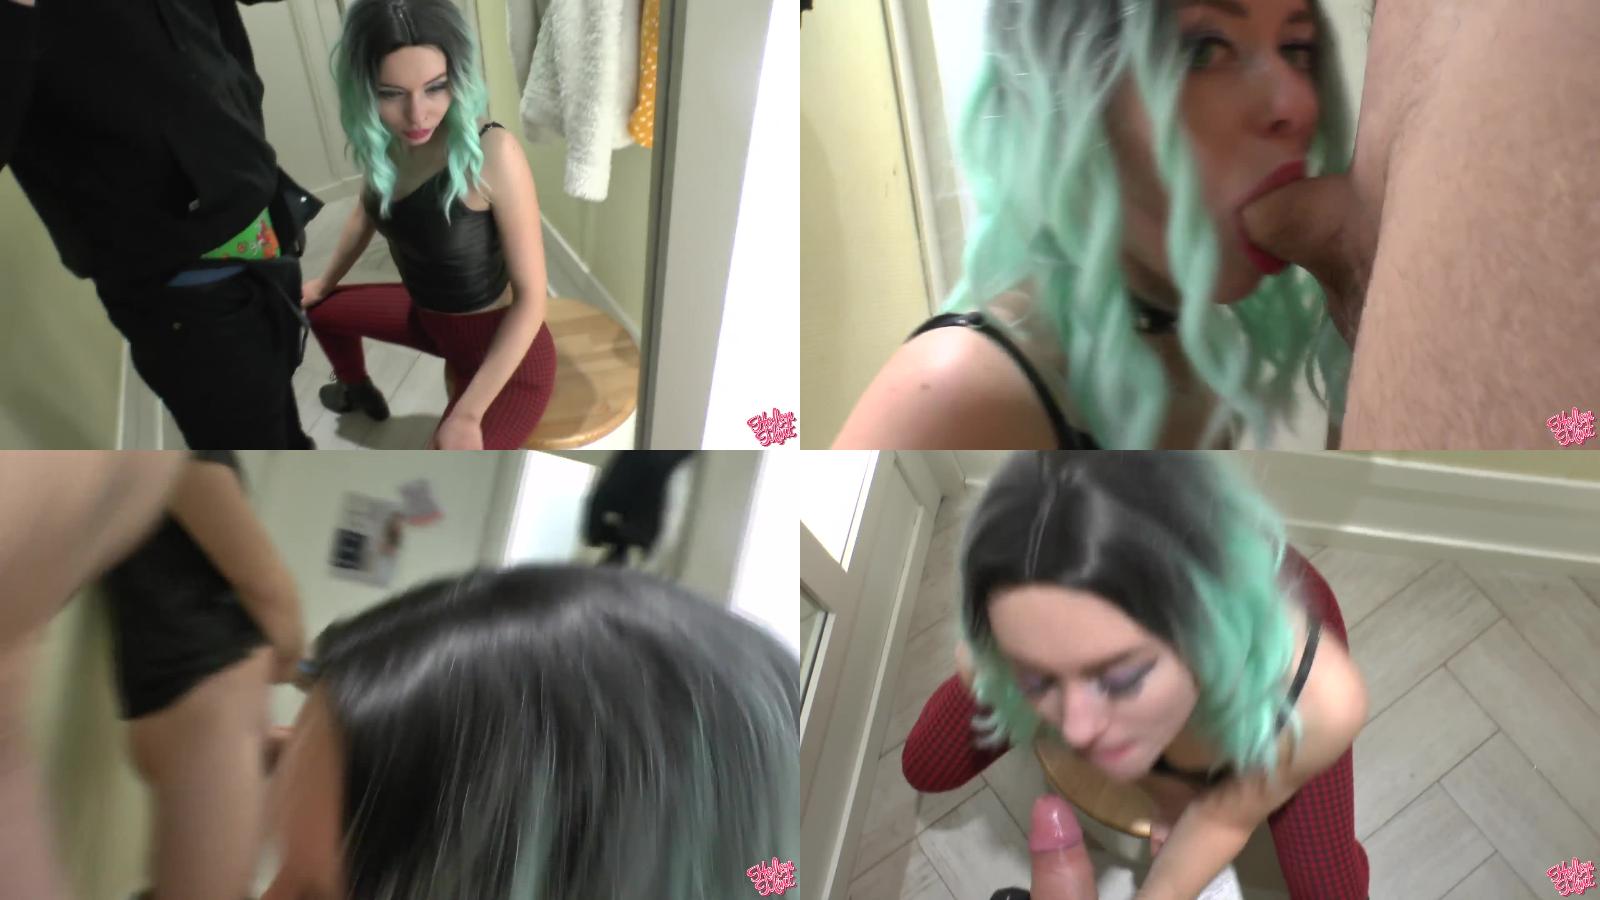 HelenMint – Blowjob in the Fitting Room